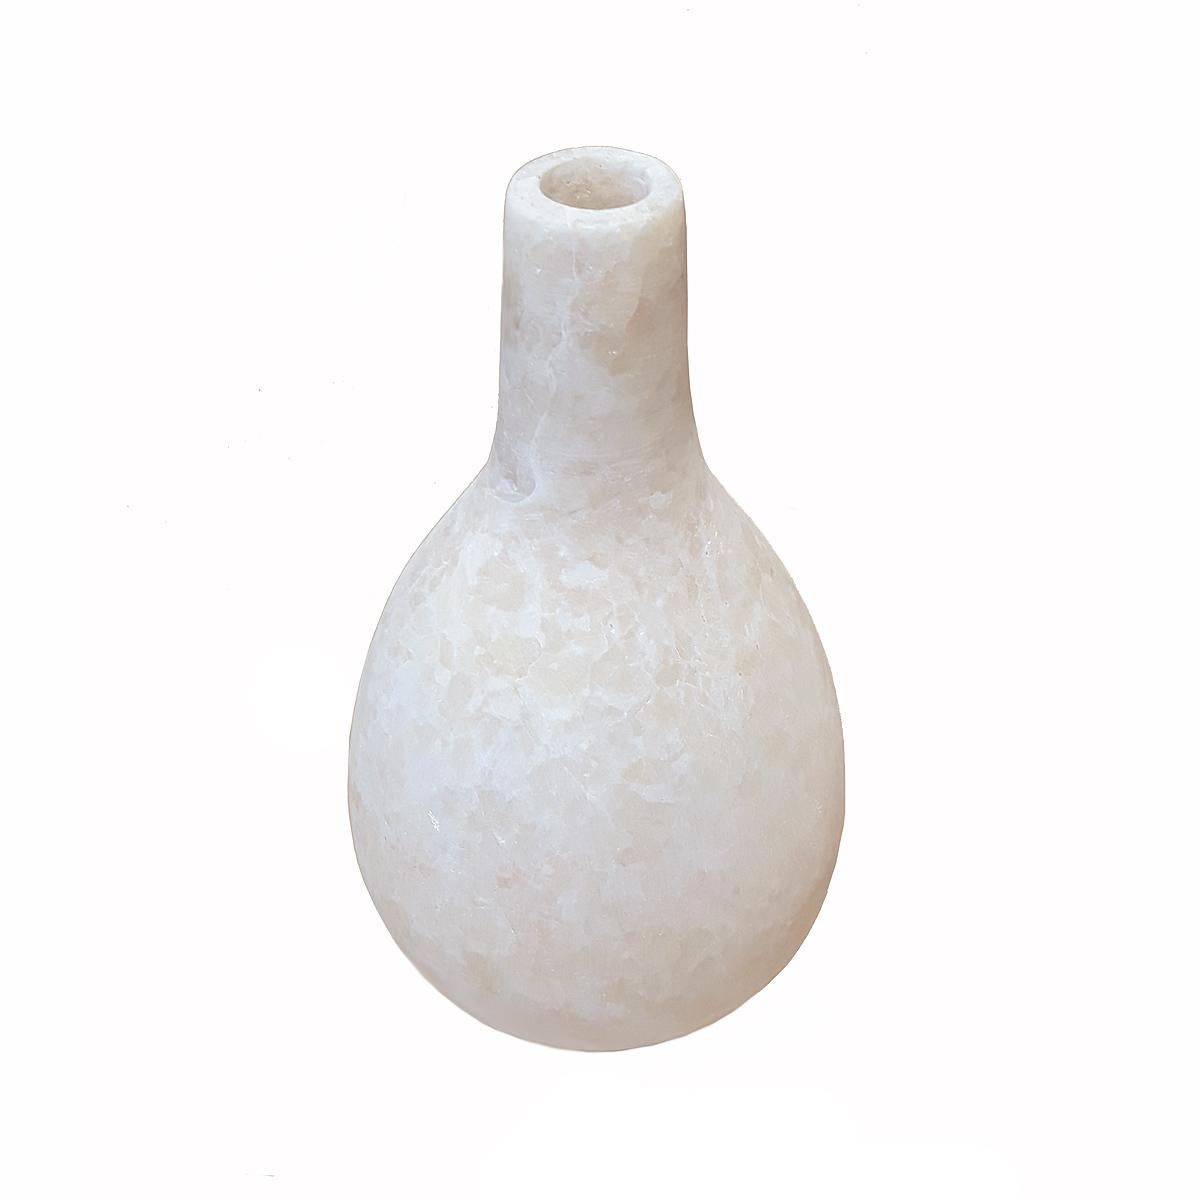 A decorative alabaster bottle, hand-crafted in Luxor, Egypt. A bottom opening allows the piece to be used as a lamp or screen for low-intensity lights (professional conversion recommended). 

 